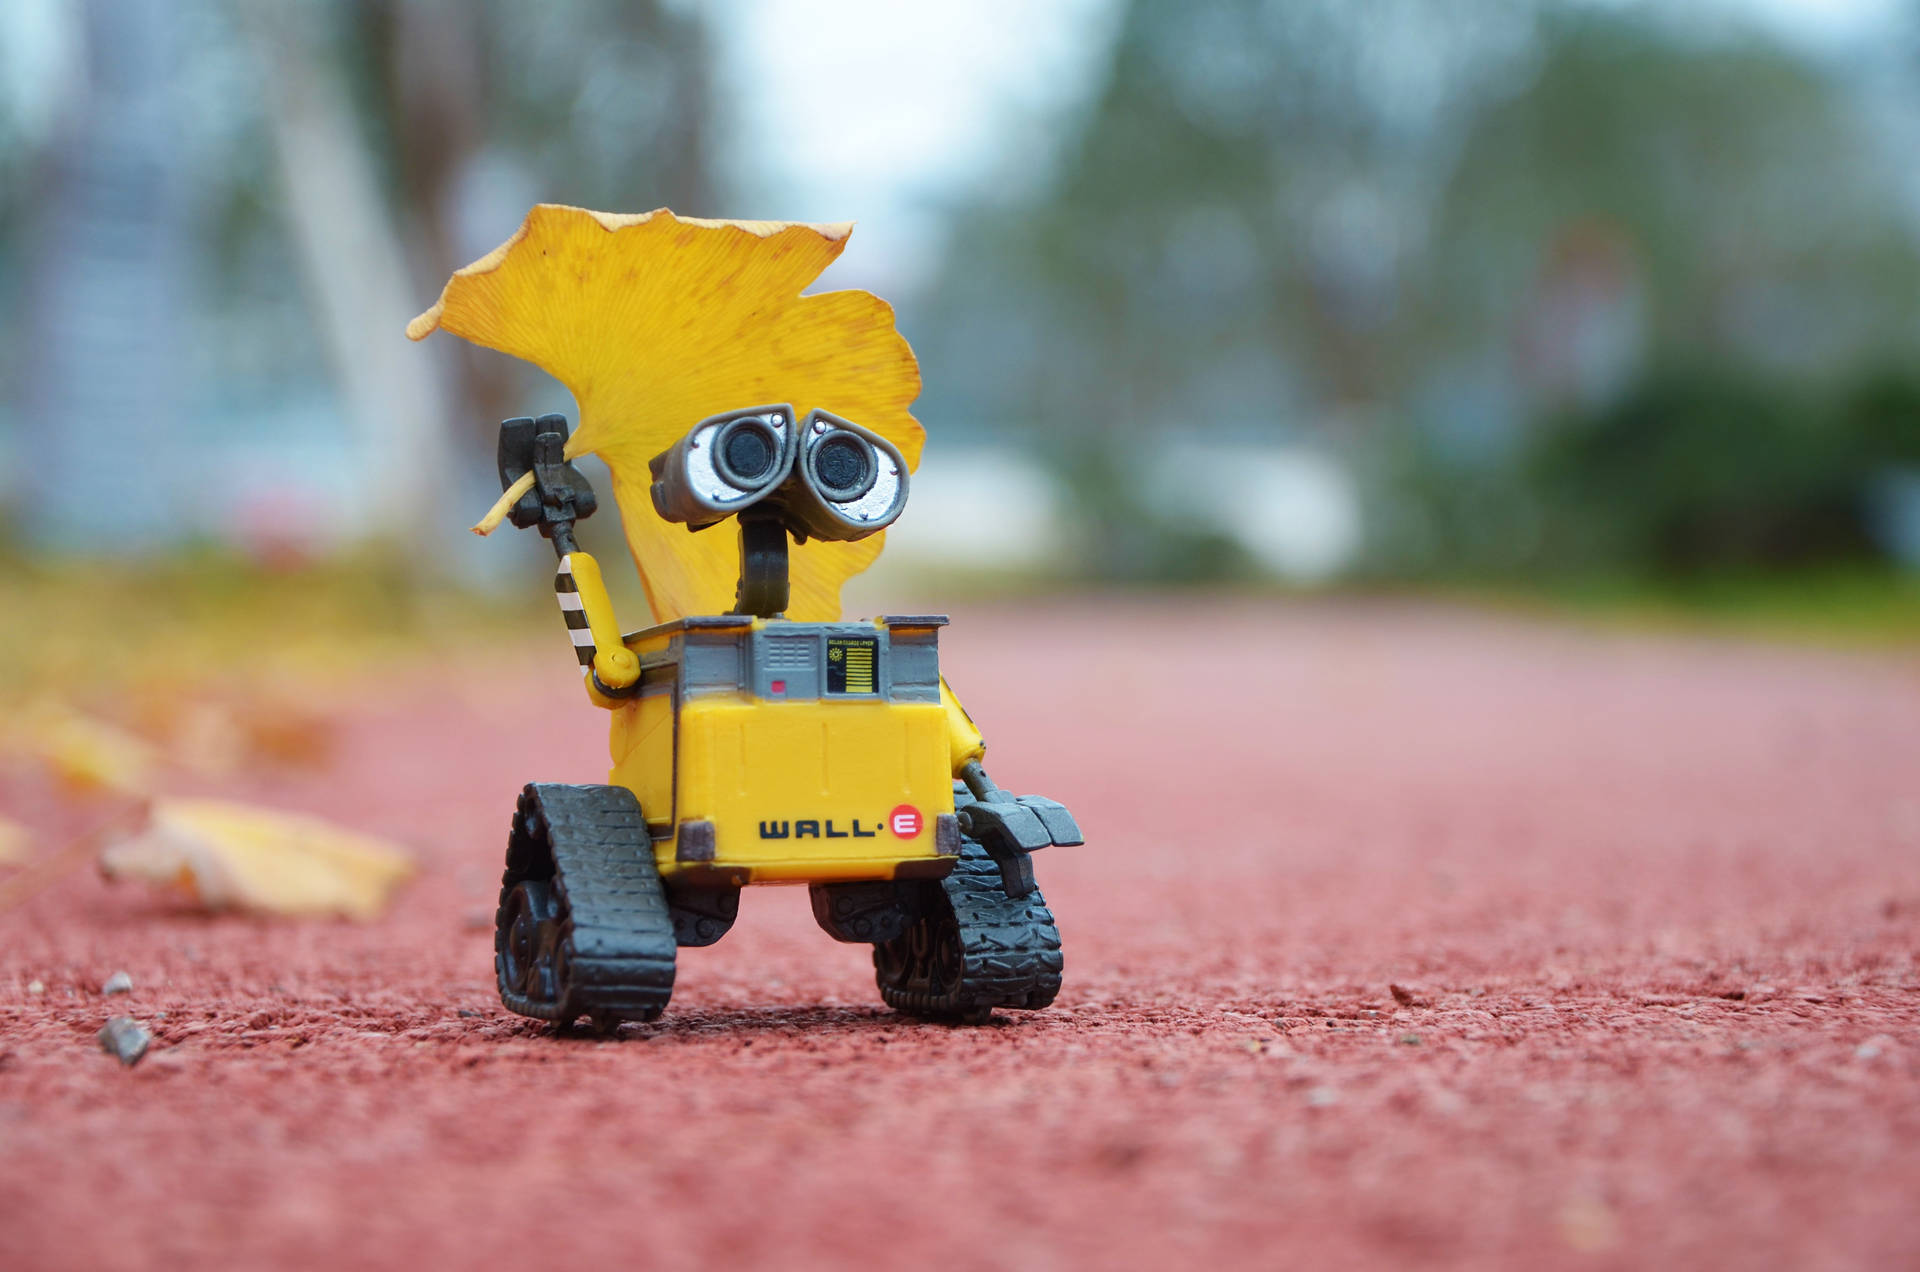 Wall E With Yellow Leaf Background